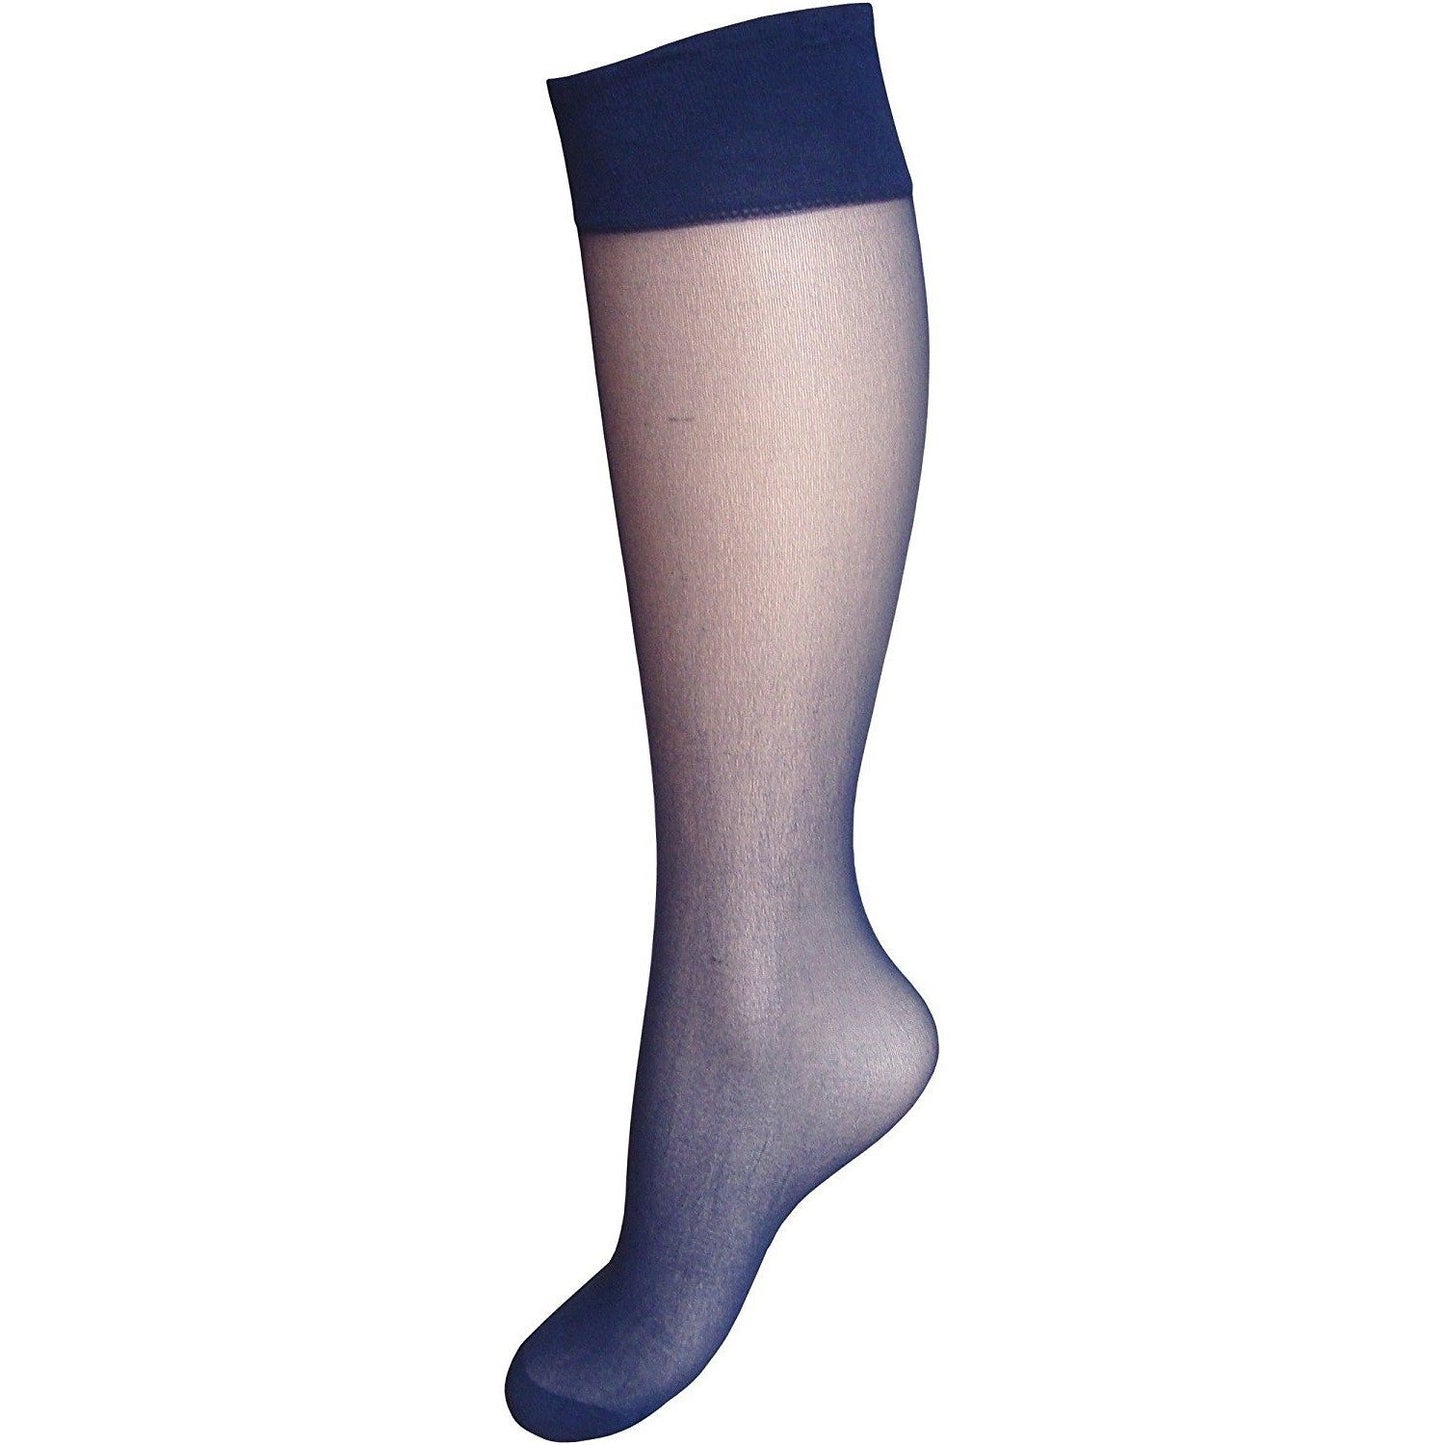 Load image into Gallery viewer, Silky Smooth Knit Knee High Trouser Socks 2 pair pack - Leggsbeautiful
